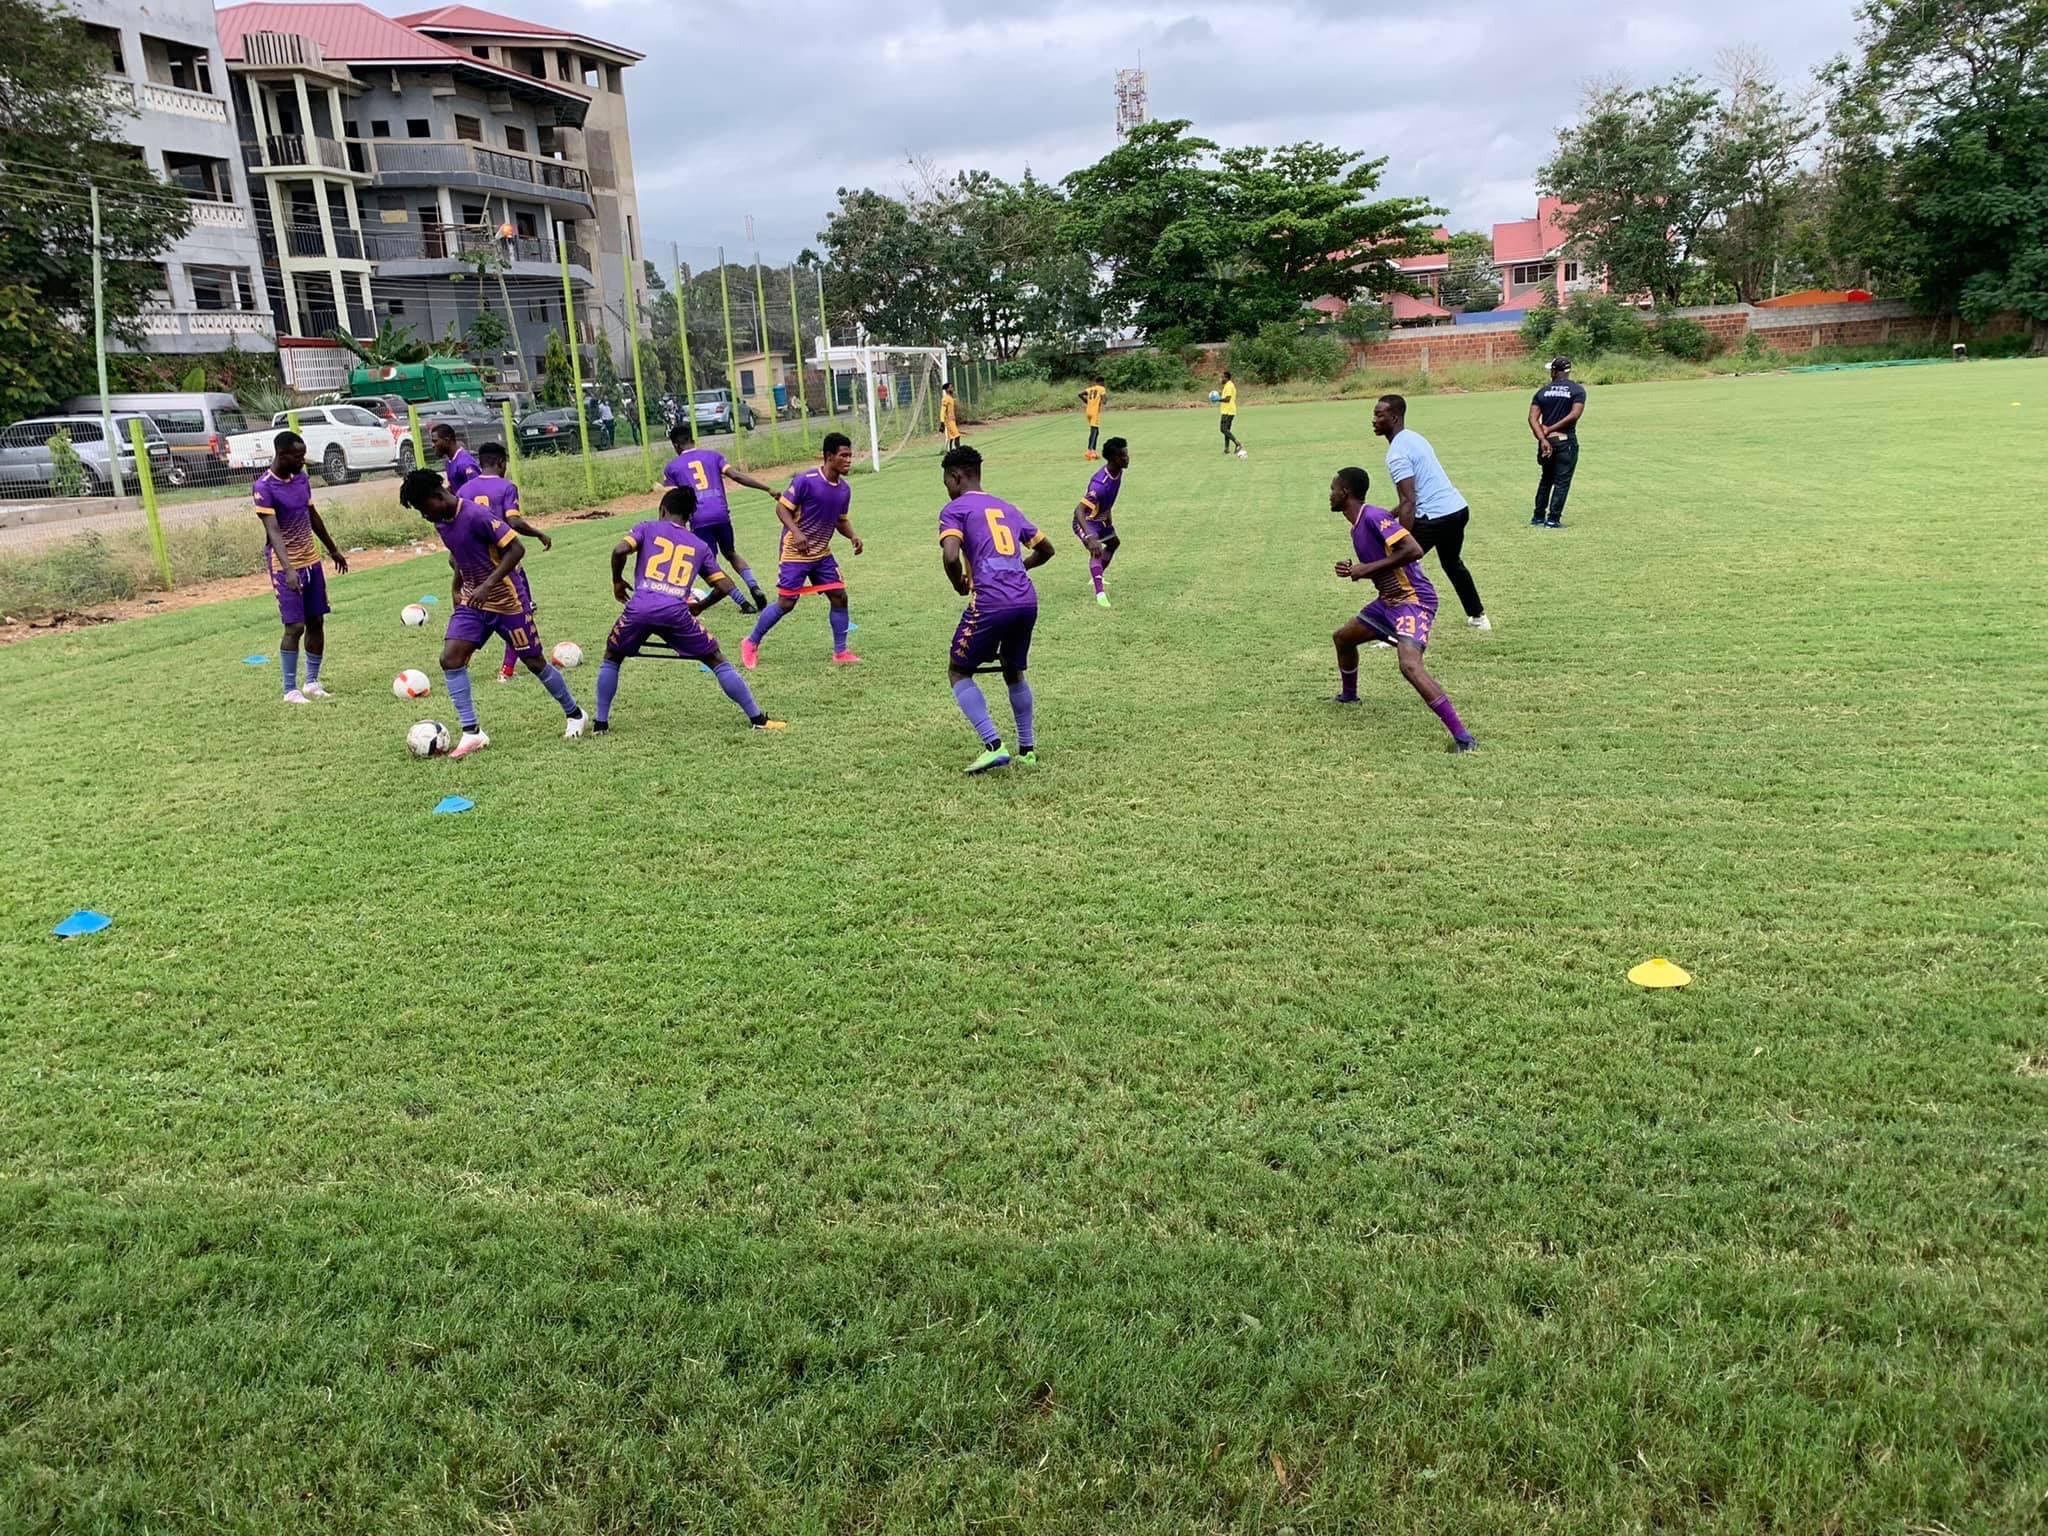 Hearts of Oak beat Tema Youth 4-2 in friendly ahead of Champions League tie against WAC OF Morocco